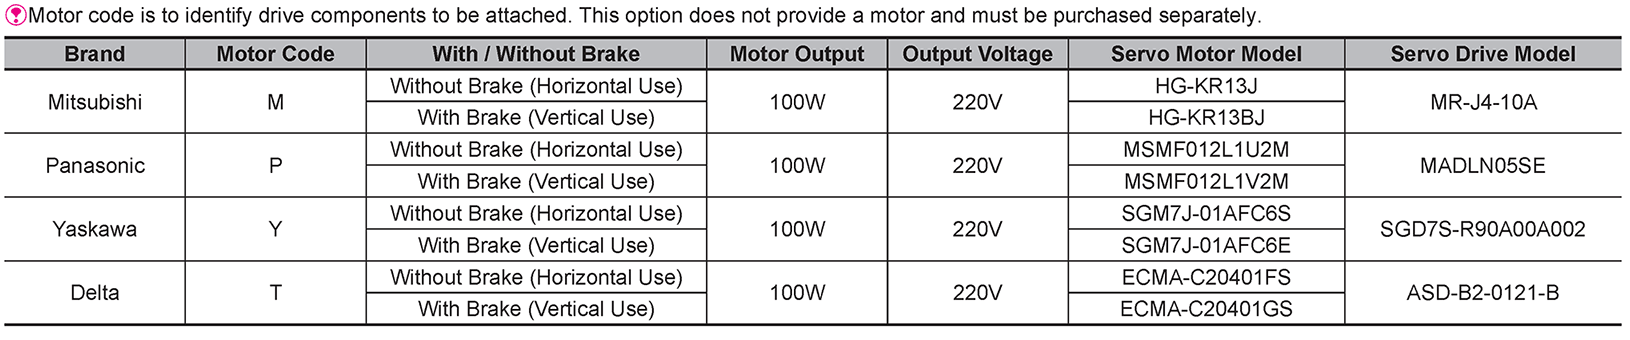 Recommended Motor